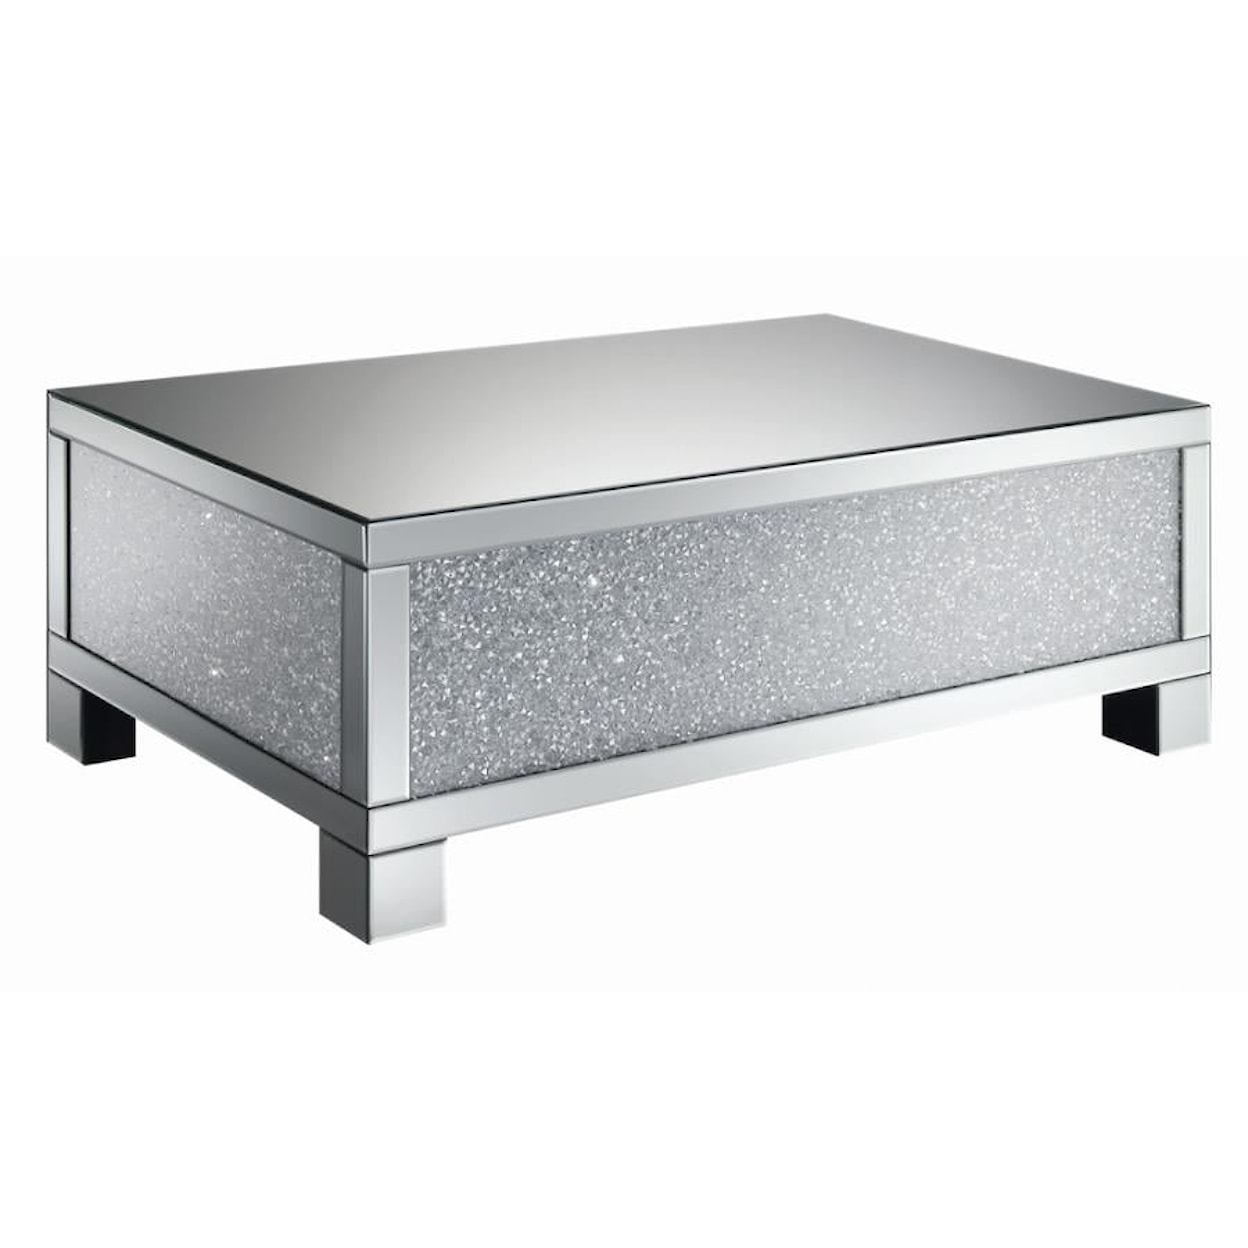 Coaster Glam BLING COFFEE TABLE. |